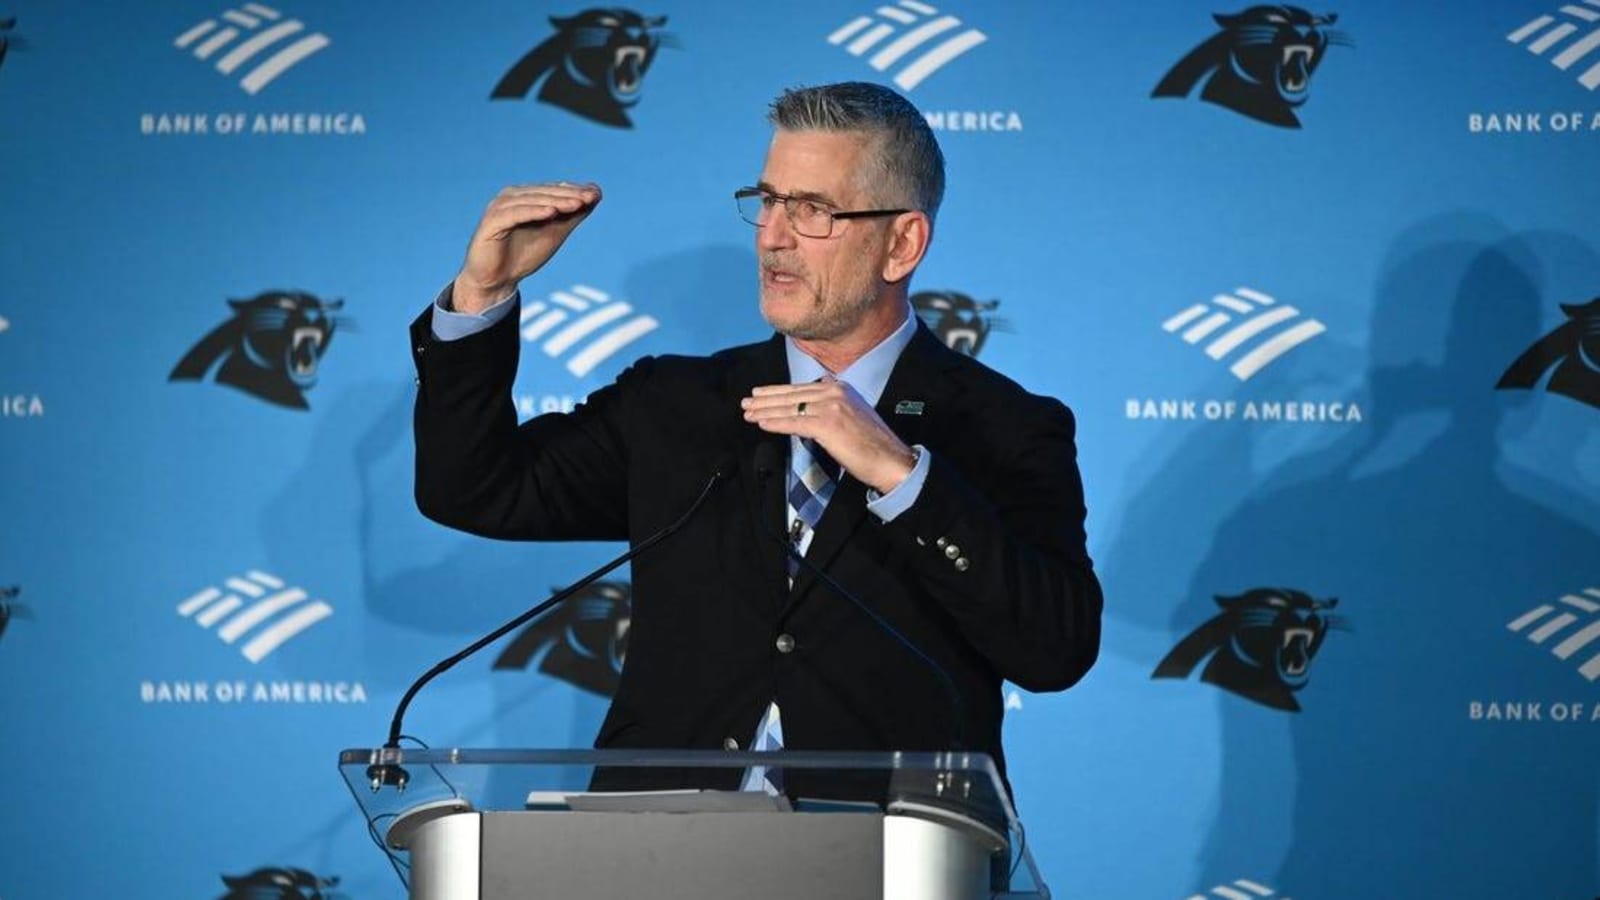 Reports: Panthers acquire No. 1 pick from Bears in blockbuster